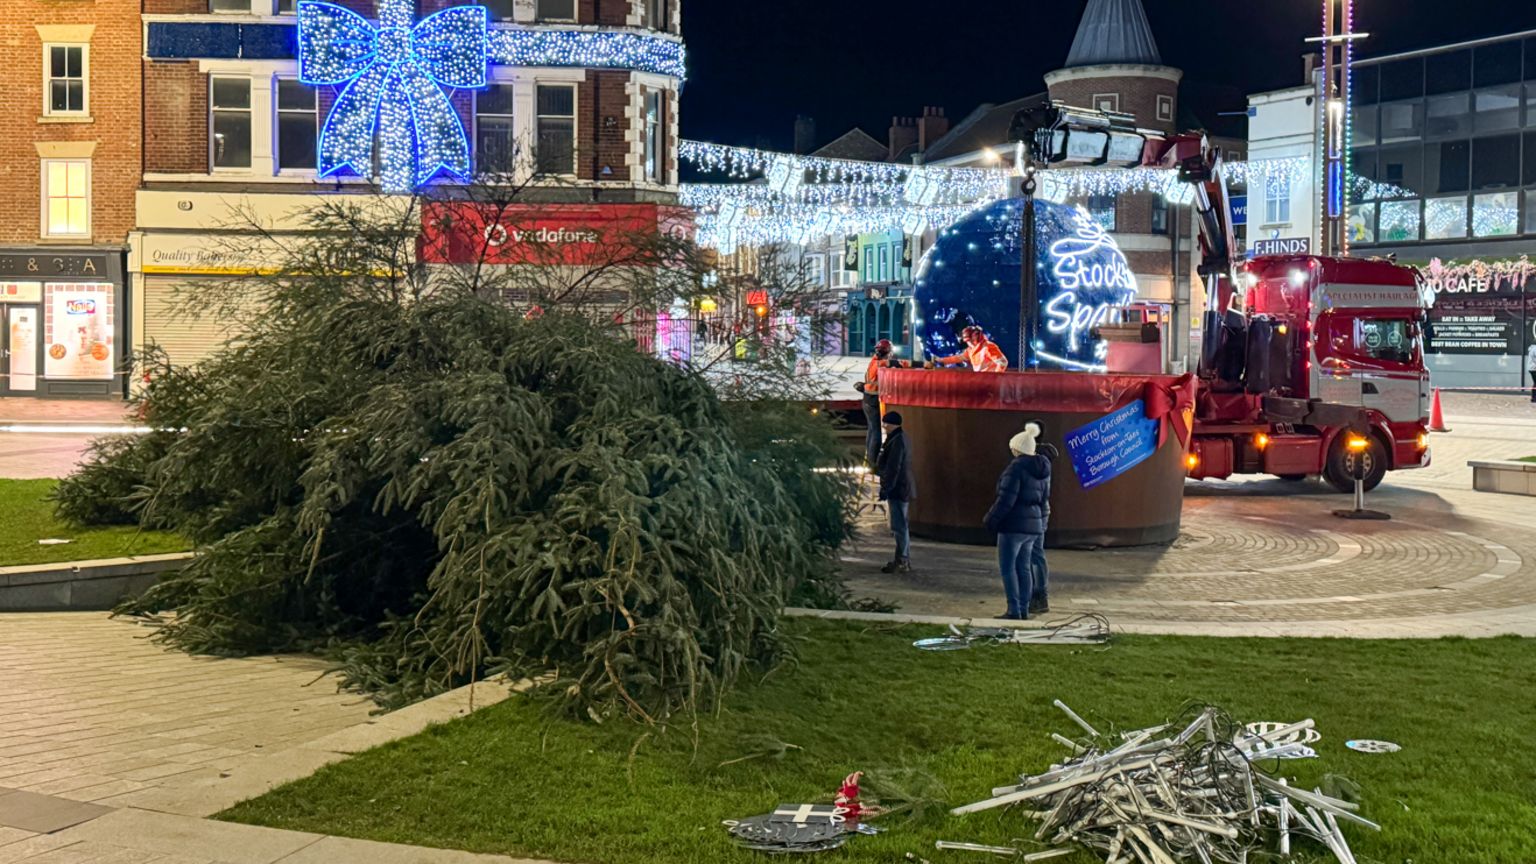 Passersby look on as the tree is cut down on Stockton's High Street